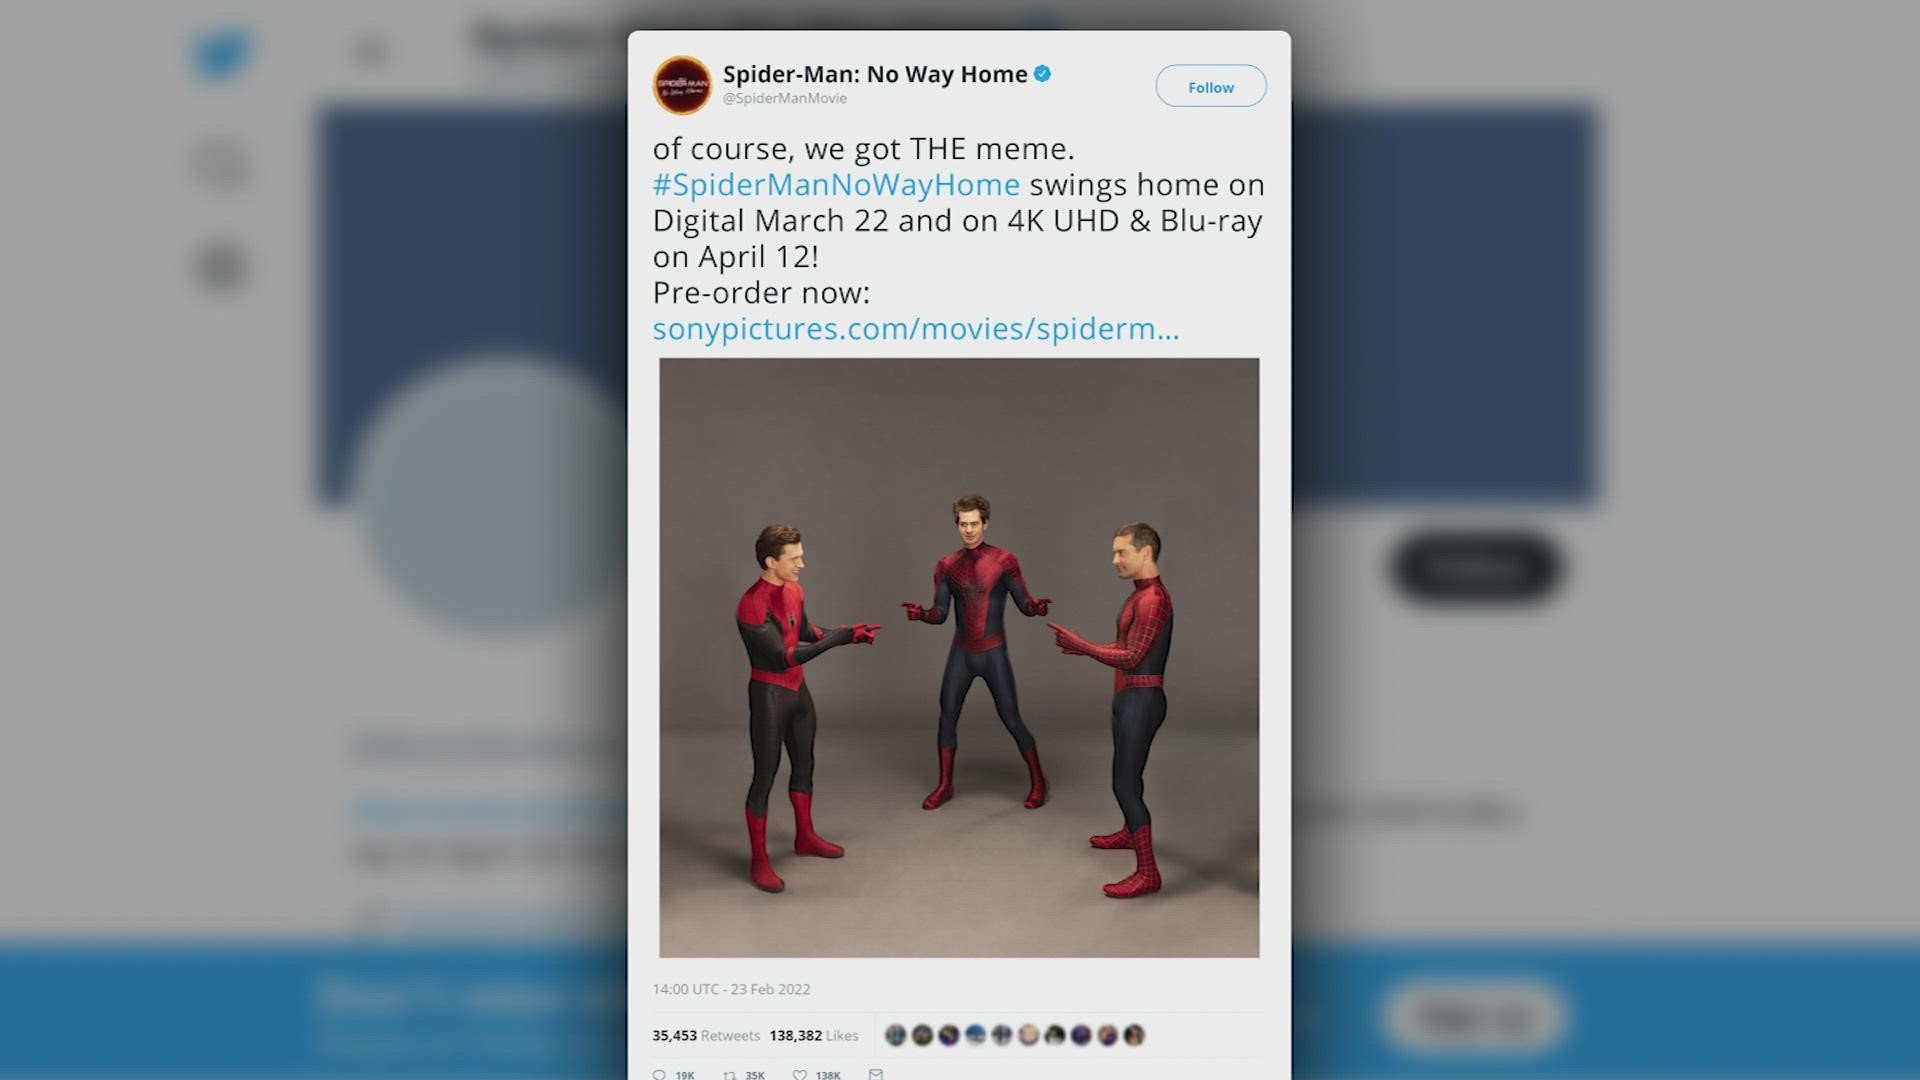 Tom Holland, Tobey Maguire and Andrew Garfield suited up to recreate a legendary Spider-Man meme and, to the surprise of no one, it quickly broke the internet.